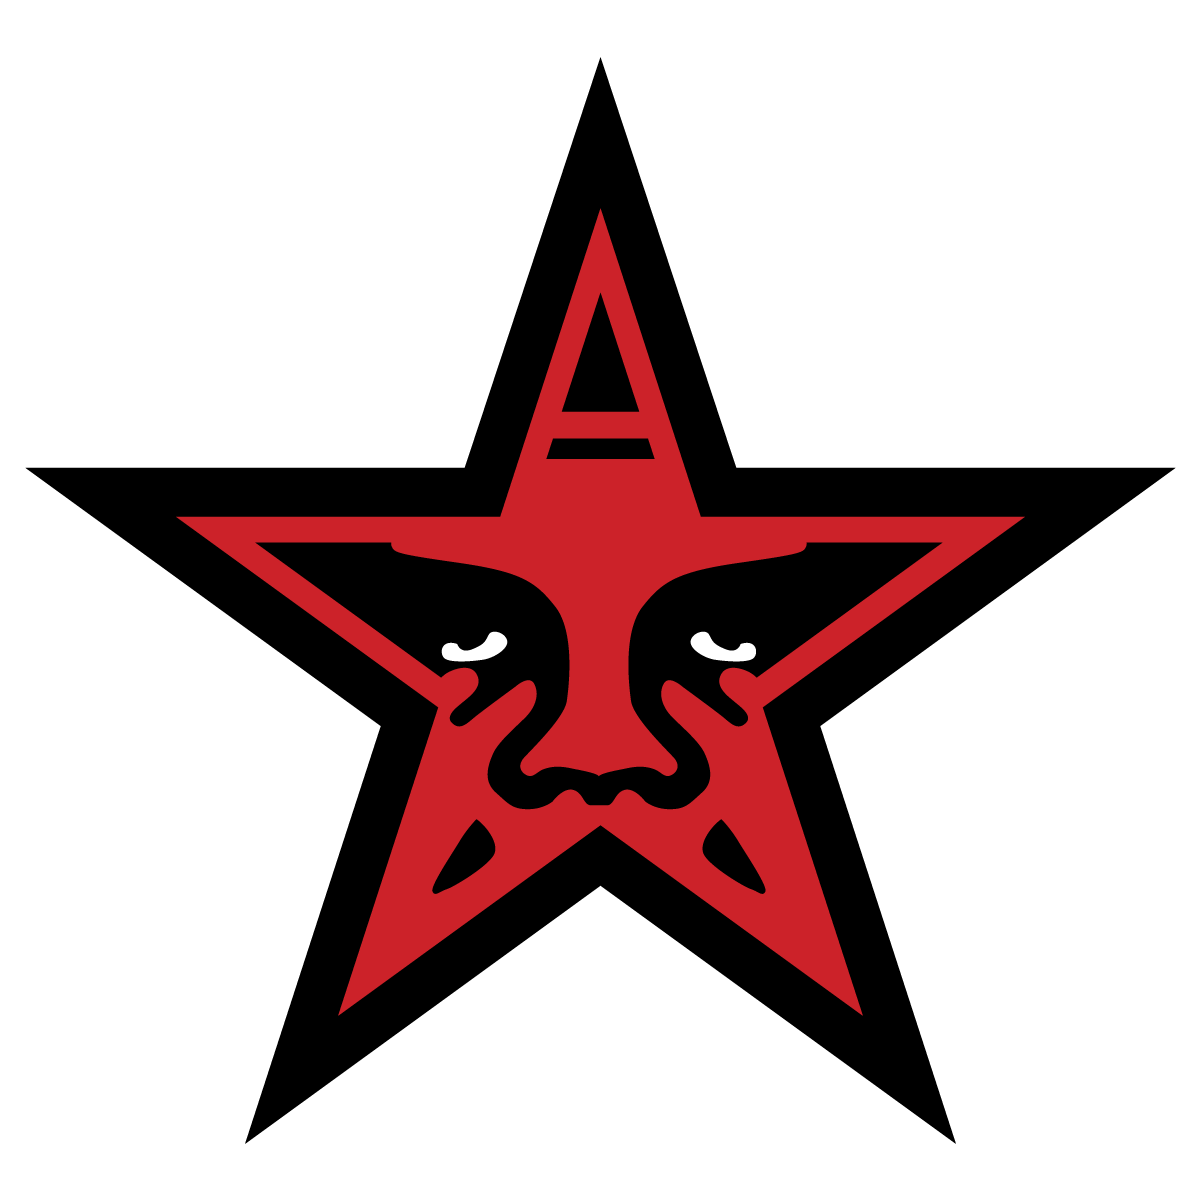 Obey GFX Logo - Obey Giant Star Red Logo Vector. Free Vector Silhouette Graphics AI